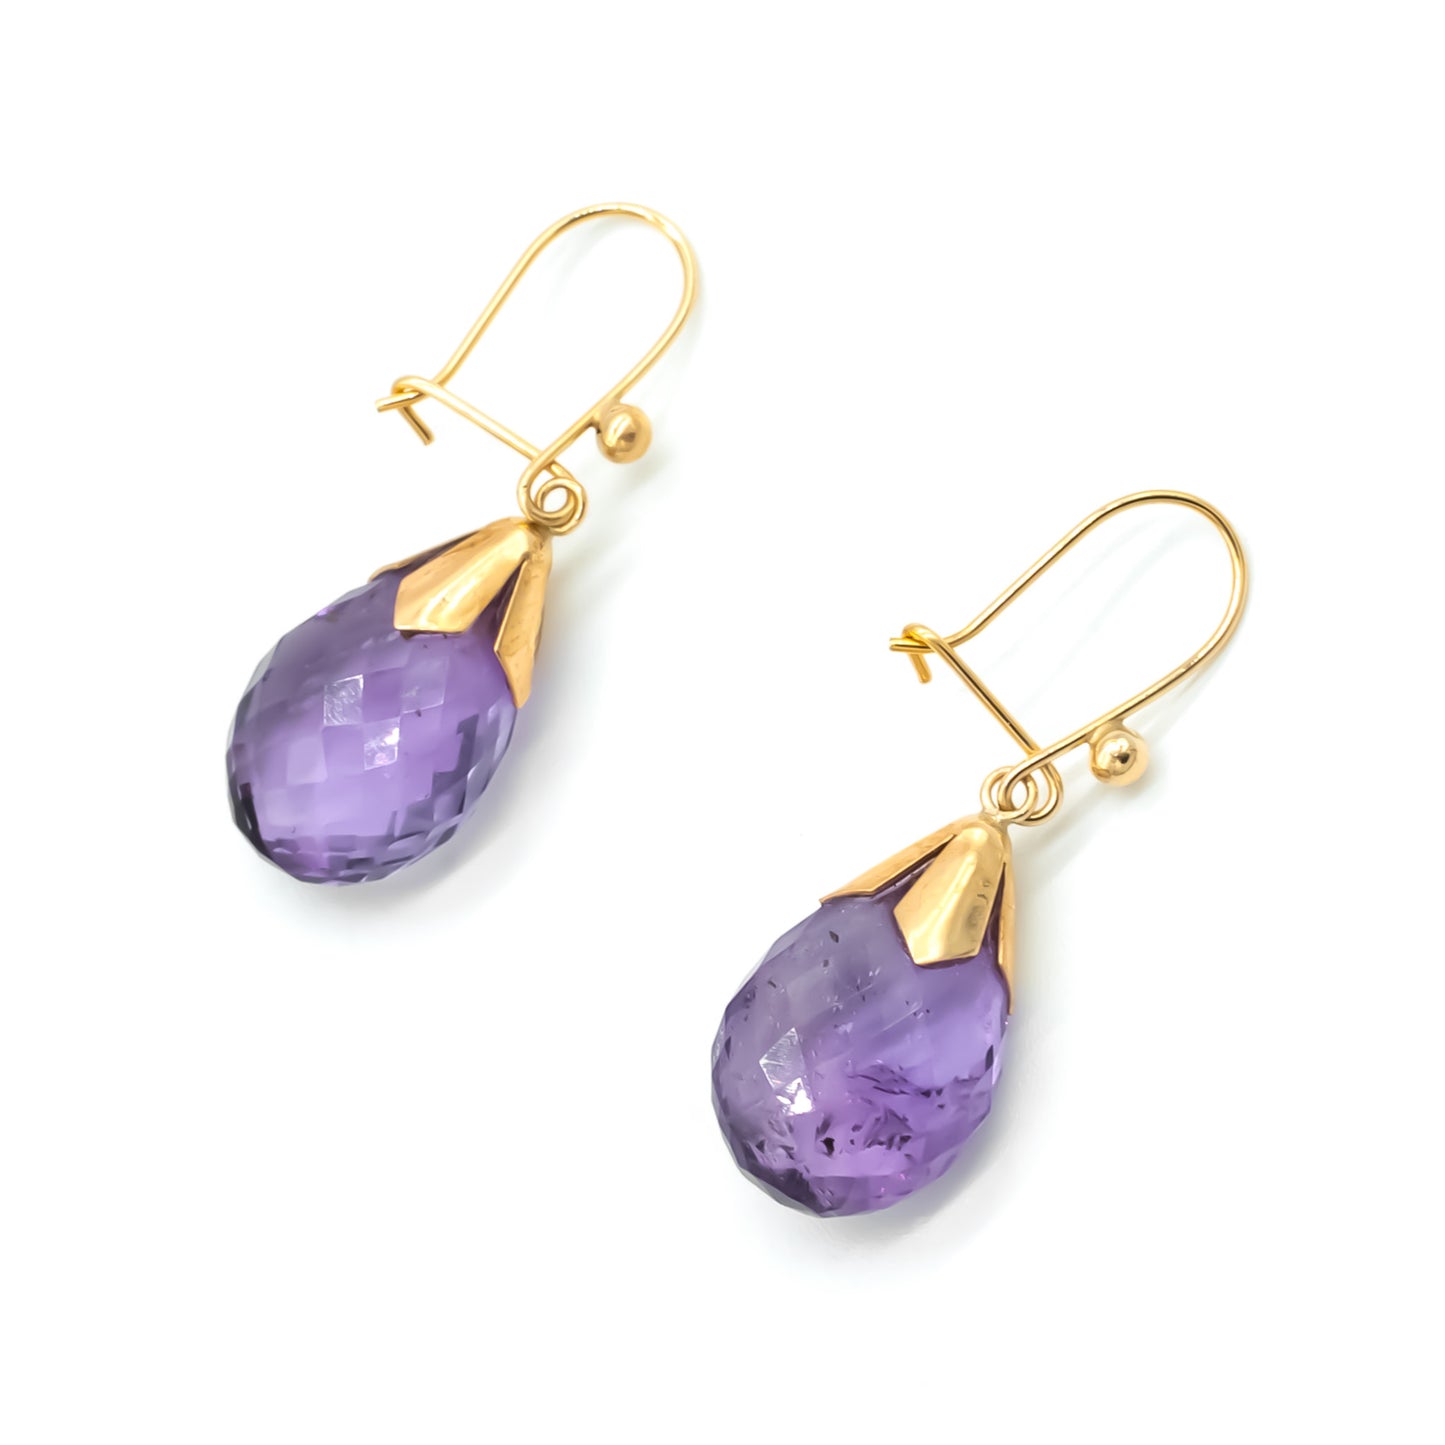 Classic 9ct gold drop earrings set with beautifully faceted amethysts.